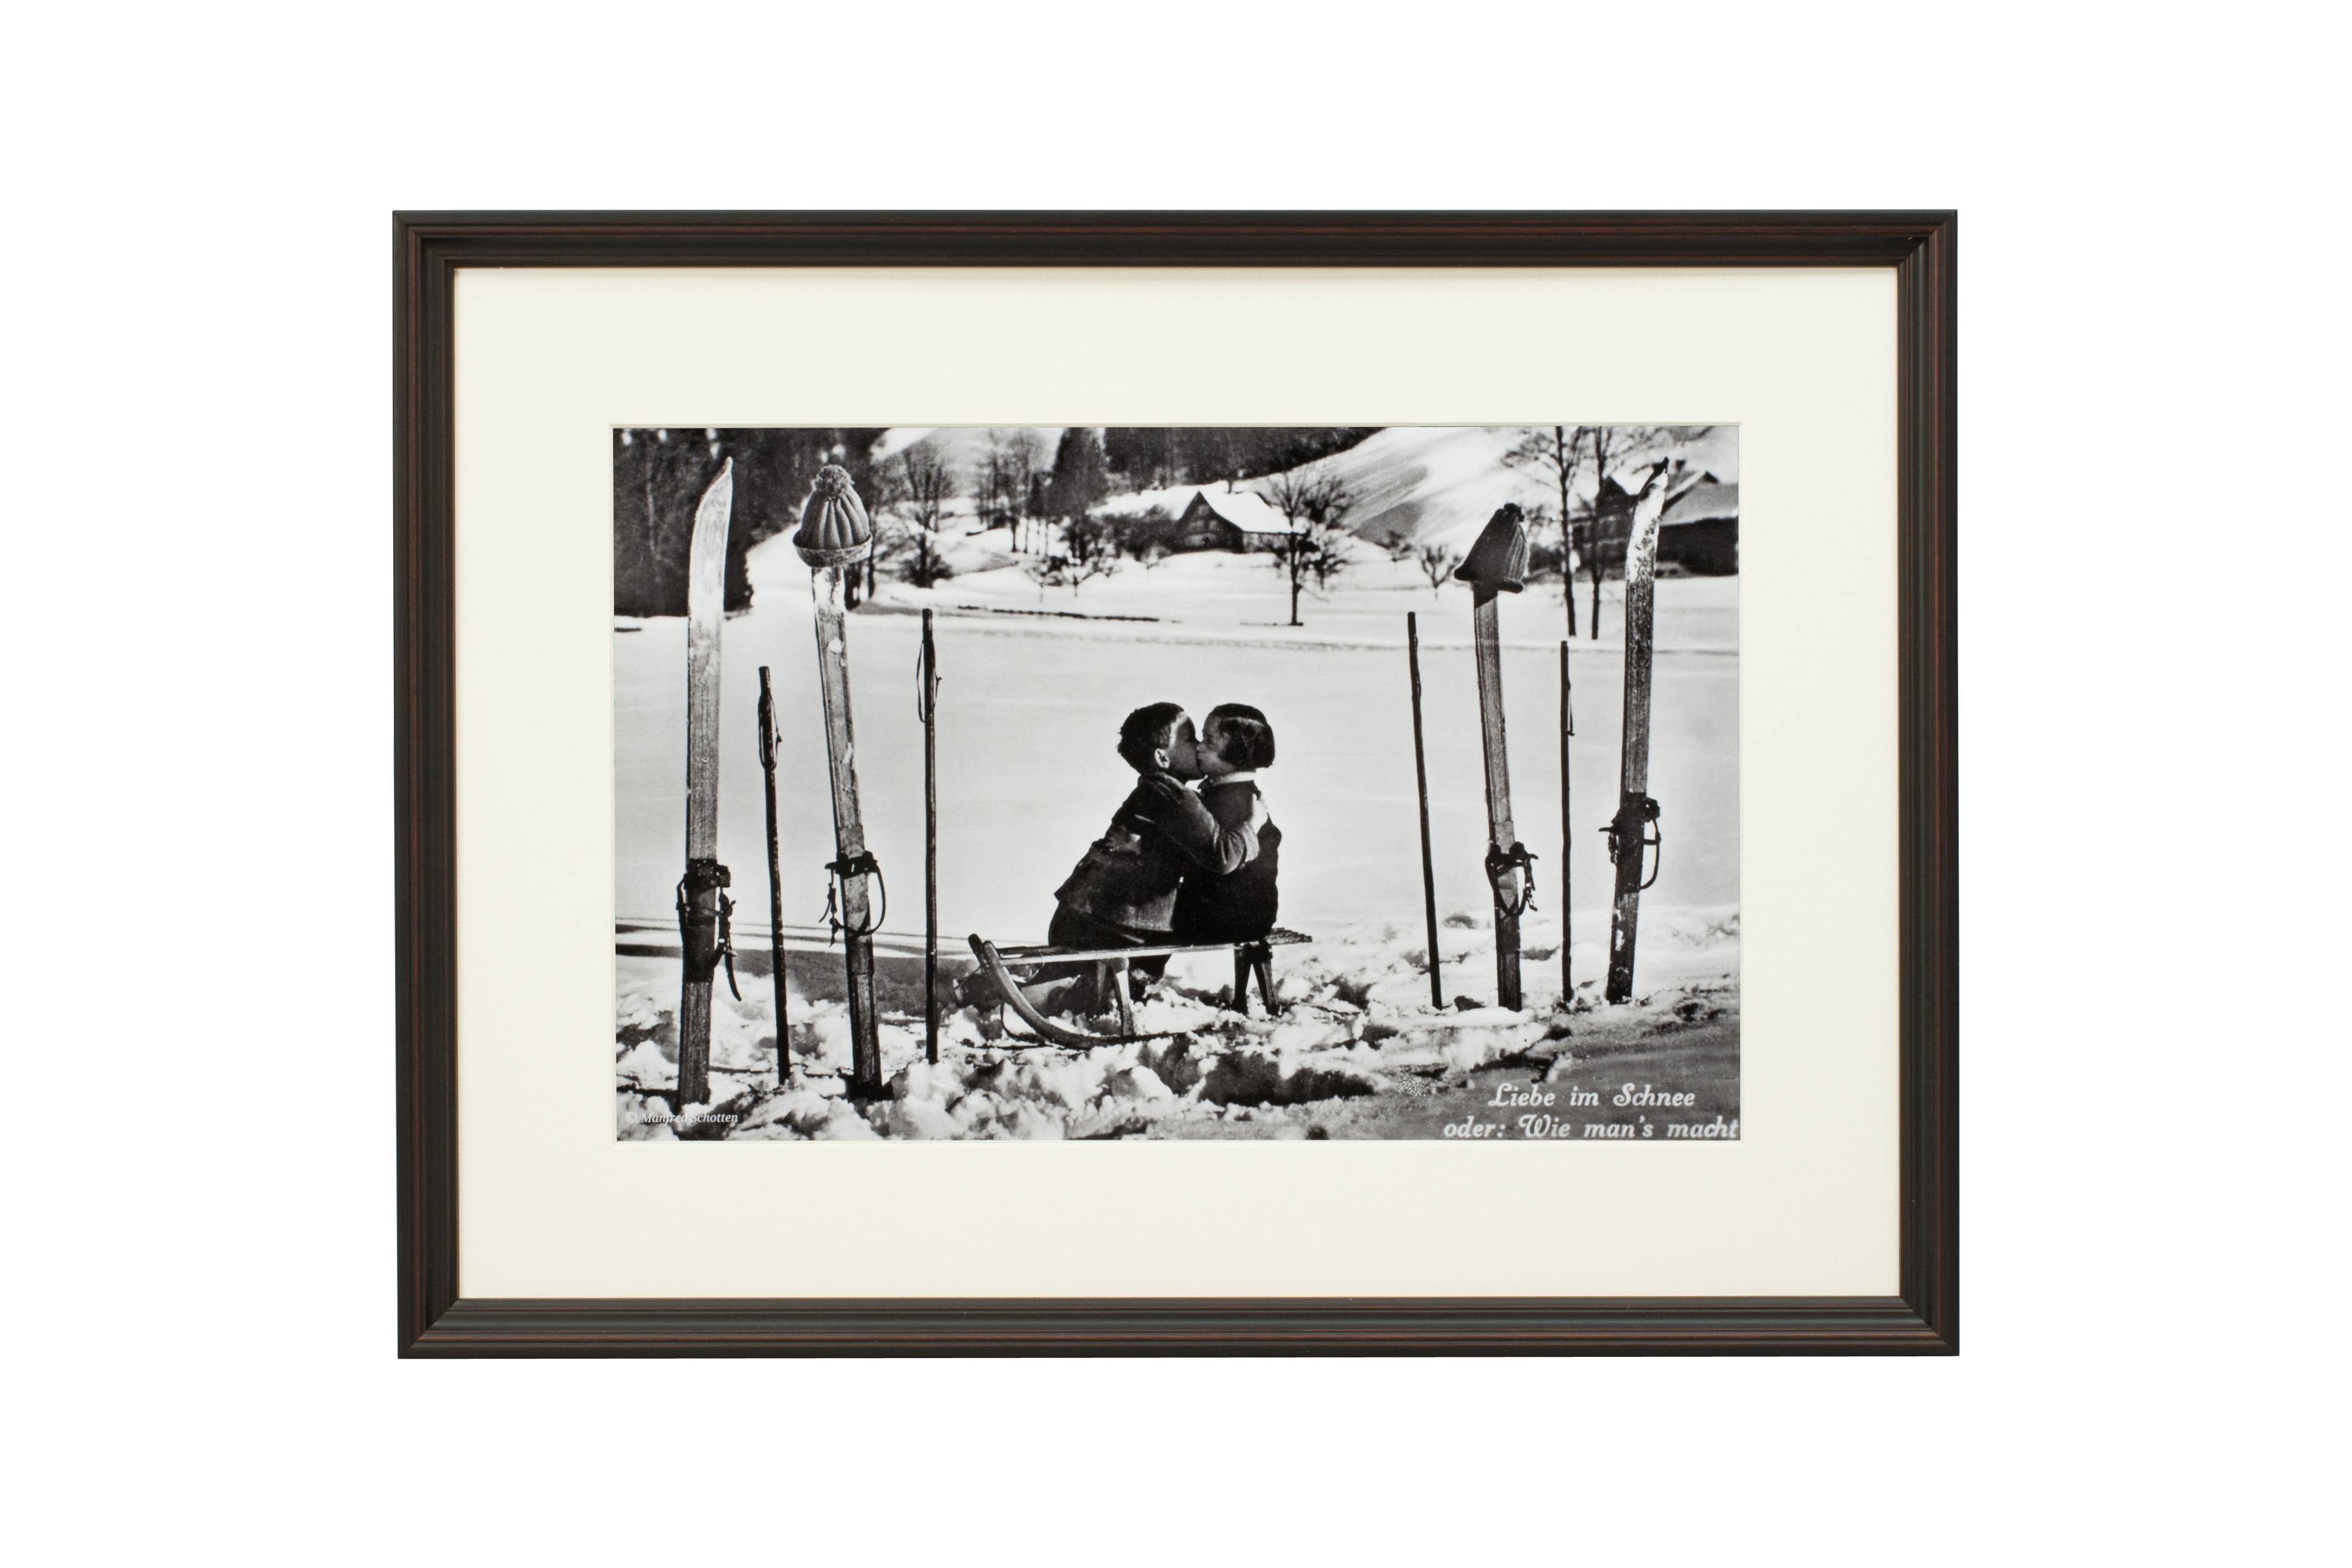 'LIEBE IM SCHNEE', a modern framed and mounted black and white photograph after an original 1930's skiing photograph. The frame is black with a burgundy undercoat, the glazing is clarity+ premium synthetic glass. Black & white alpine photos are the